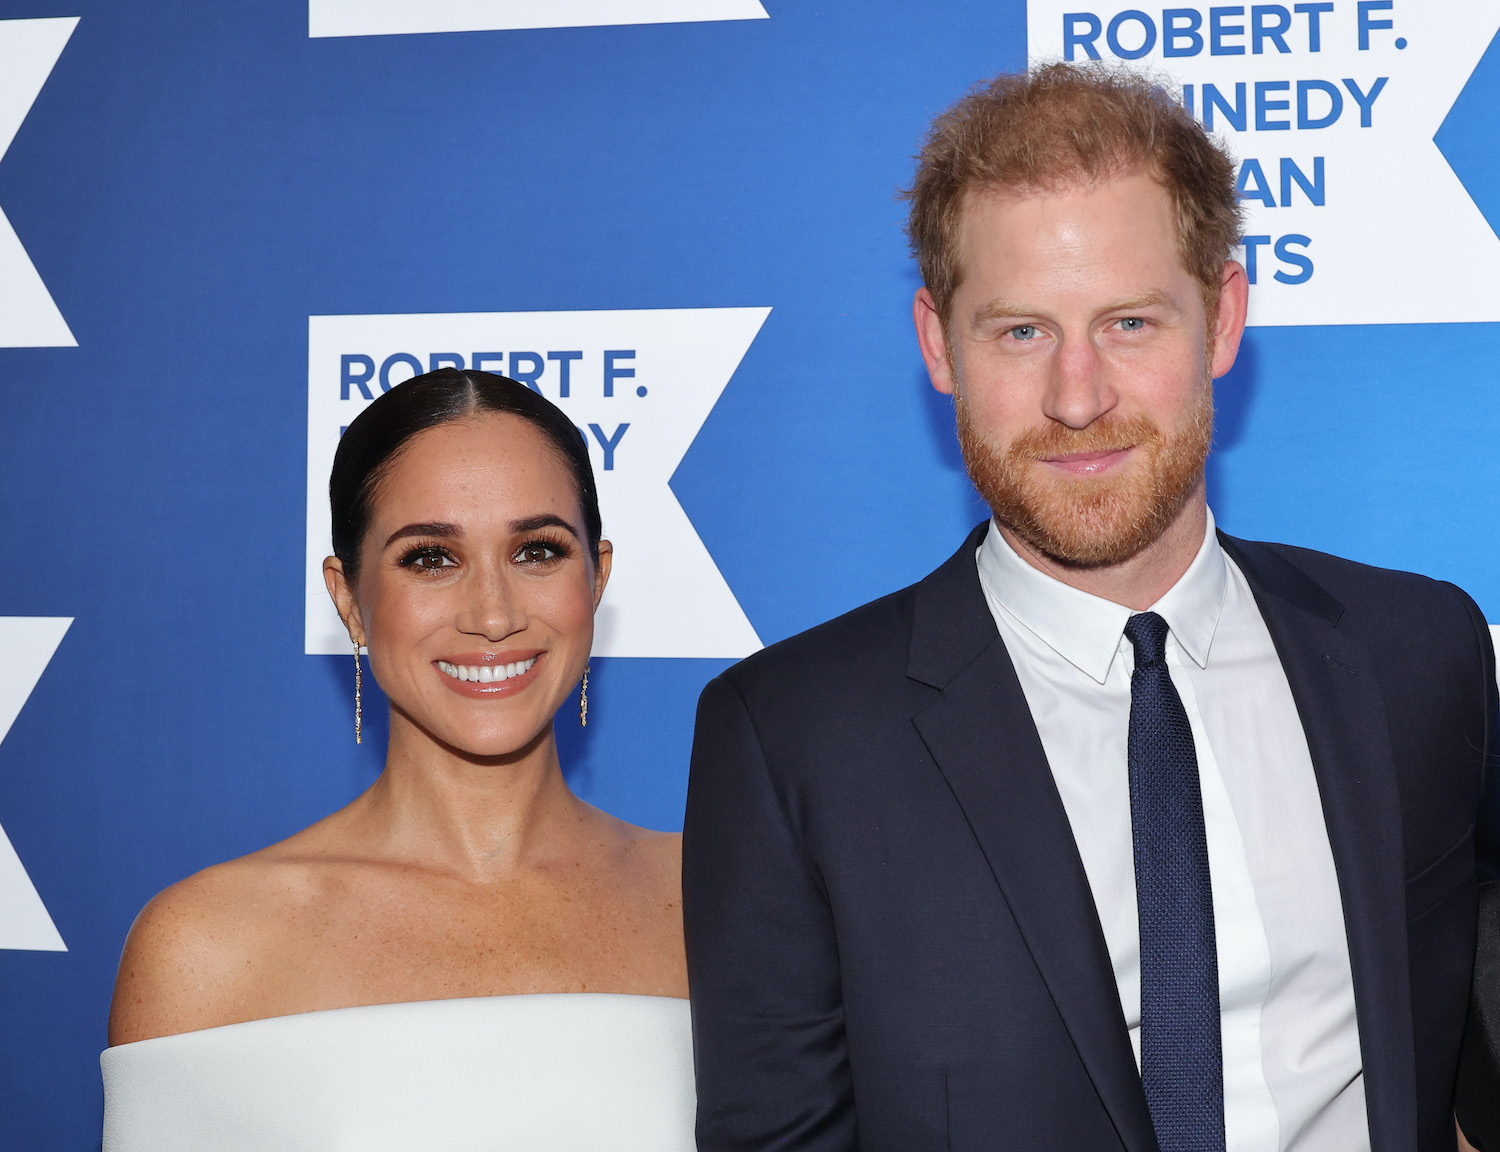 Body Language Expert Points Out Subtle Prince Harry and Meghan Markle Gesture at Ripple of Hope Gala Conveyed ‘Ownership’ and ‘Love’